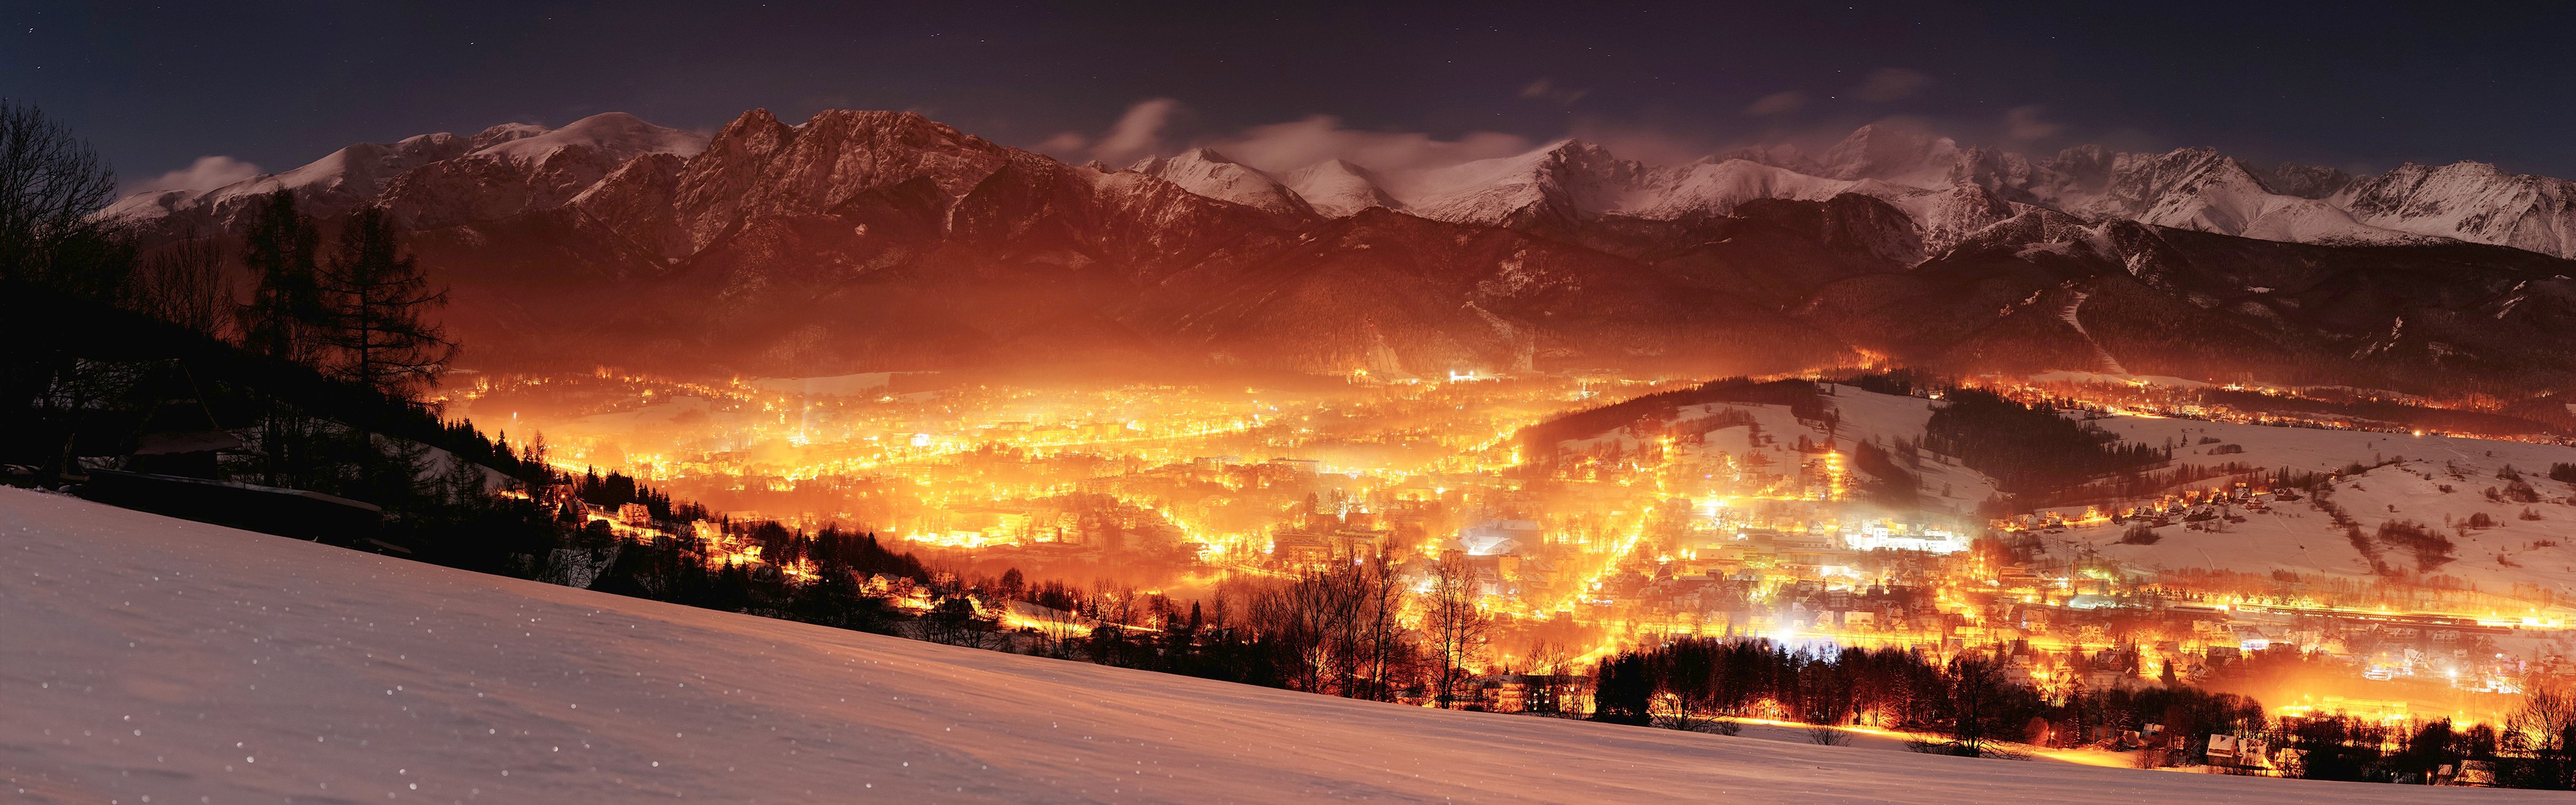 Poland, Landscape, Mountain, Valley, Lights, Glowing, Winter, Multiple Display, Night Wallpaper